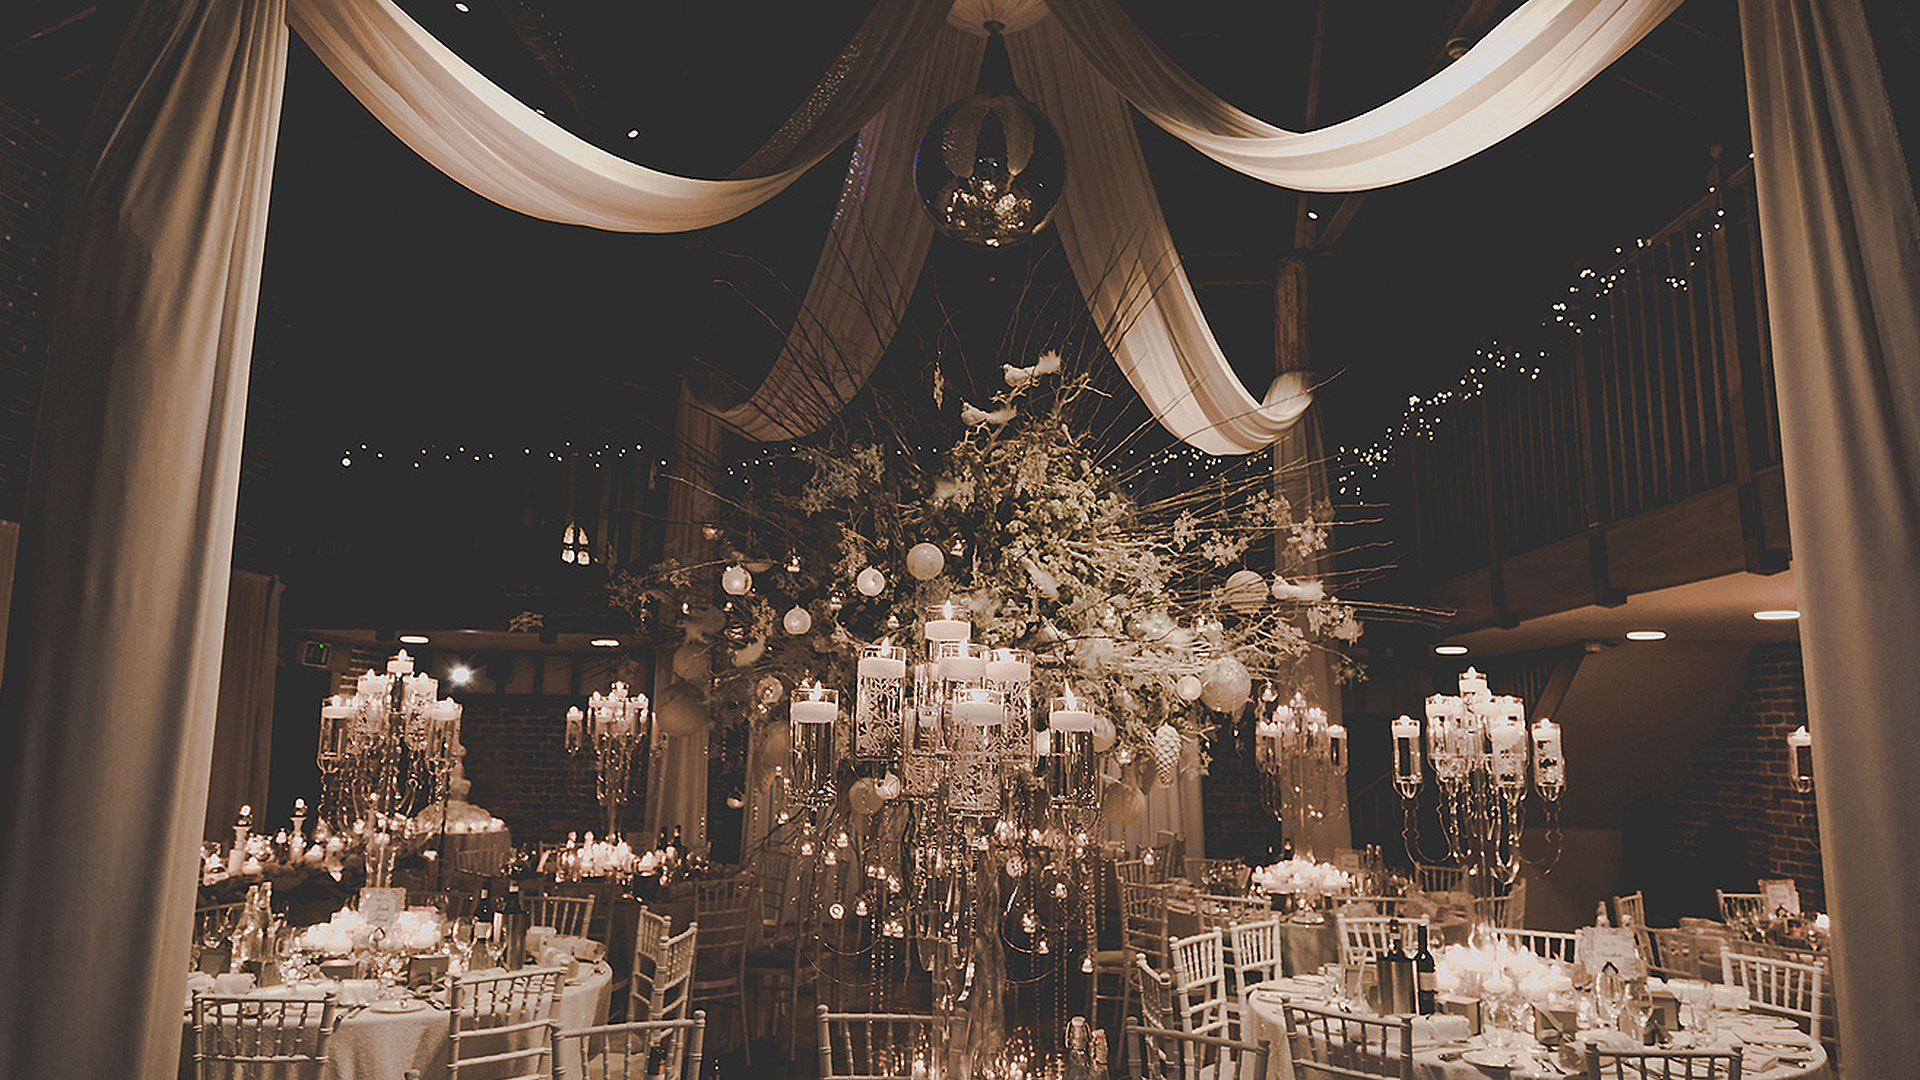 The Mill Barn is decorated with white drapes and candelabras for a beautiful winter wedding